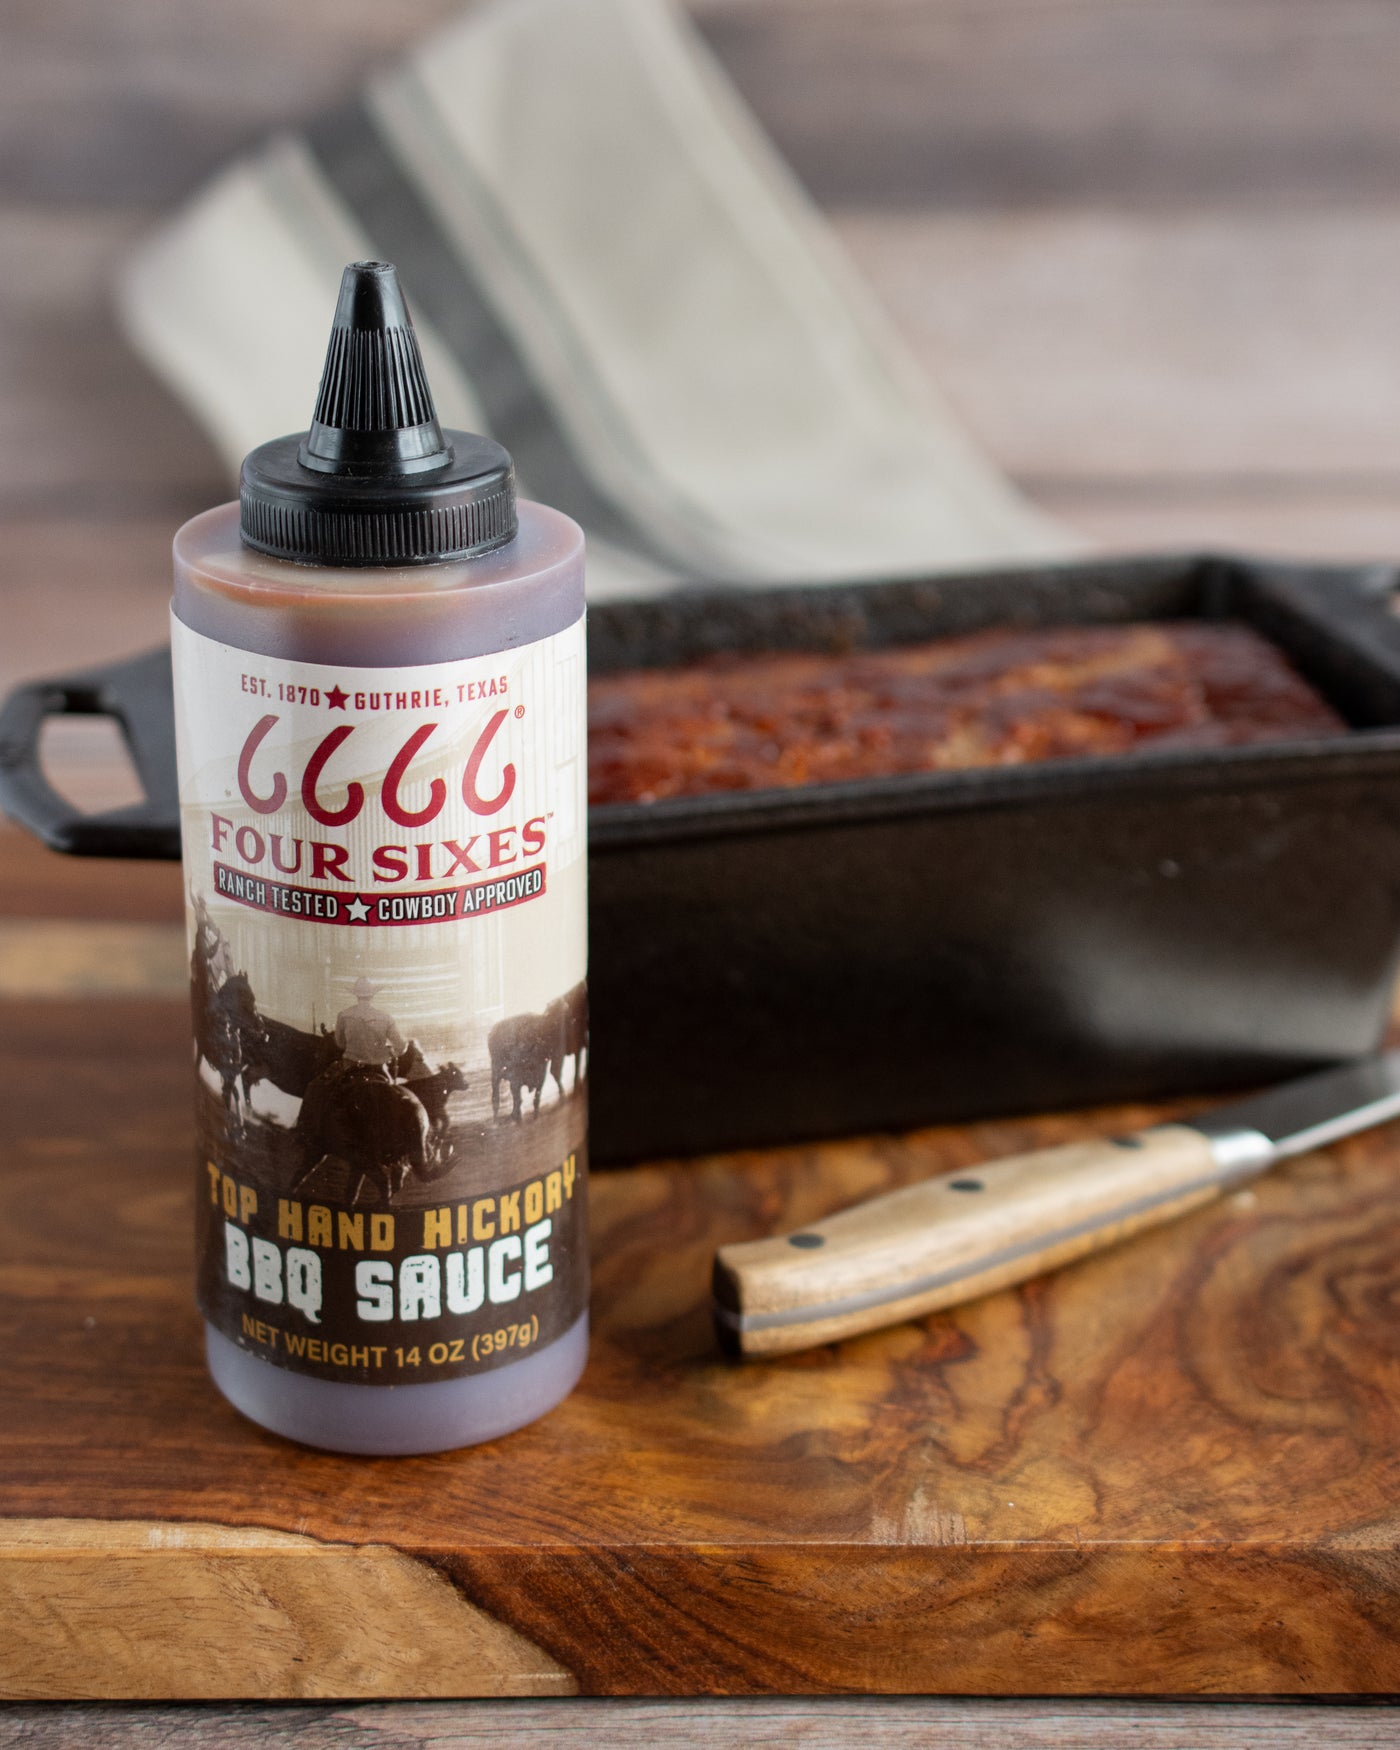 Four Sixes Top Hand Hickory BBQ Sauce